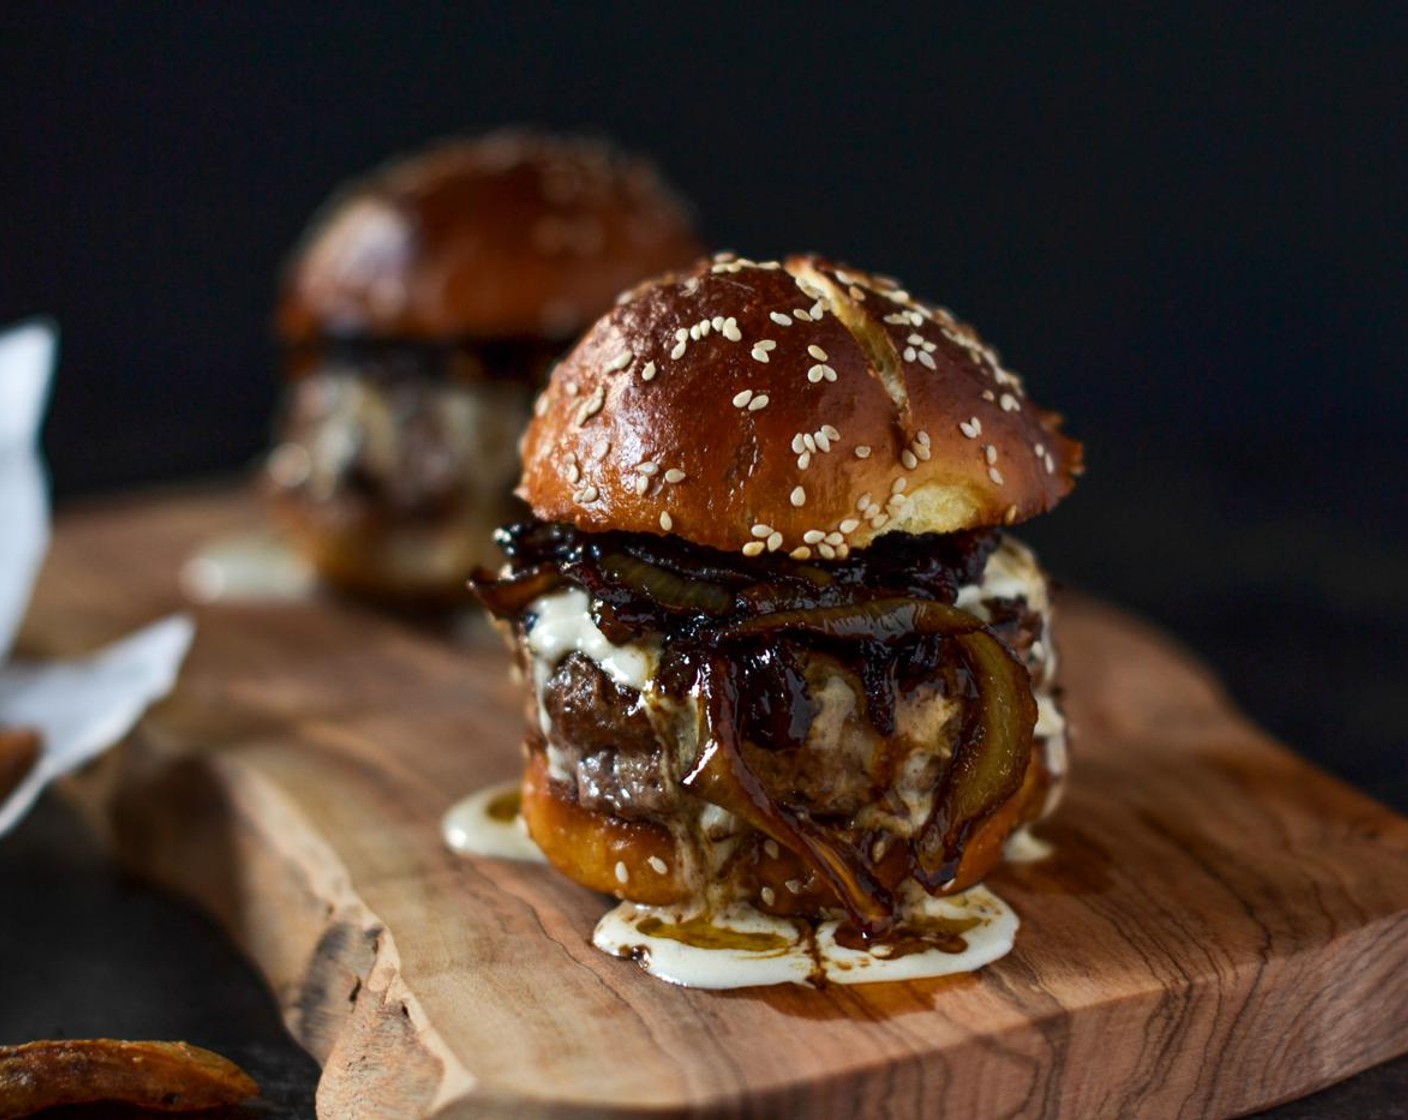 step 8 To assemble your burger, simply start off with your patty, topped off with a generous helping of sticky onions and a good dollop of the blue cheese sauce.  Top with the second bun and prepare for a monster mouthful that’s full of smokey richness!